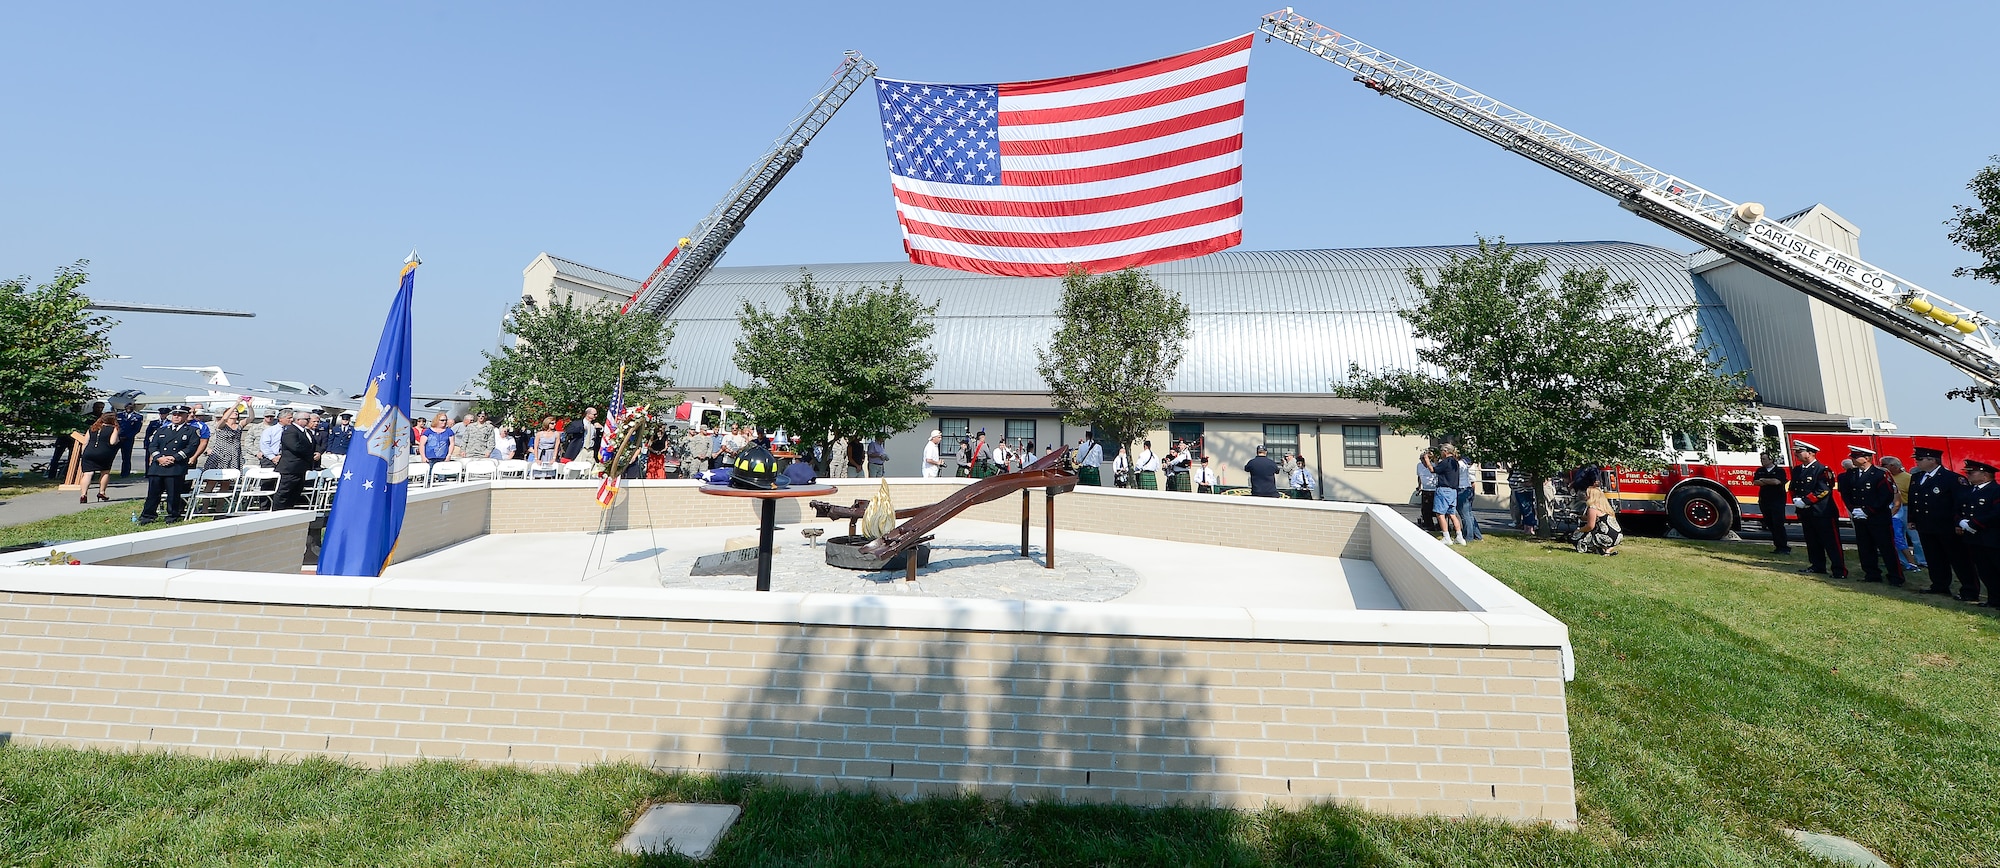 On Sept. 11, 2013 a memorial to those killed on Sept. 11, 2001 was dedicated at the Air Mobility Command museum at Dover Air Force Base, Del. The memorial, which incorporates two pieces of steel from World Trade Center tower one, a rock from the United Airlines Flight 93 crash site and a block from the damaged portion of the Pentagon, makes Delaware the 50th and final state to have a public memorial.  (U.S. Air Force photo/Greg L. Davis)